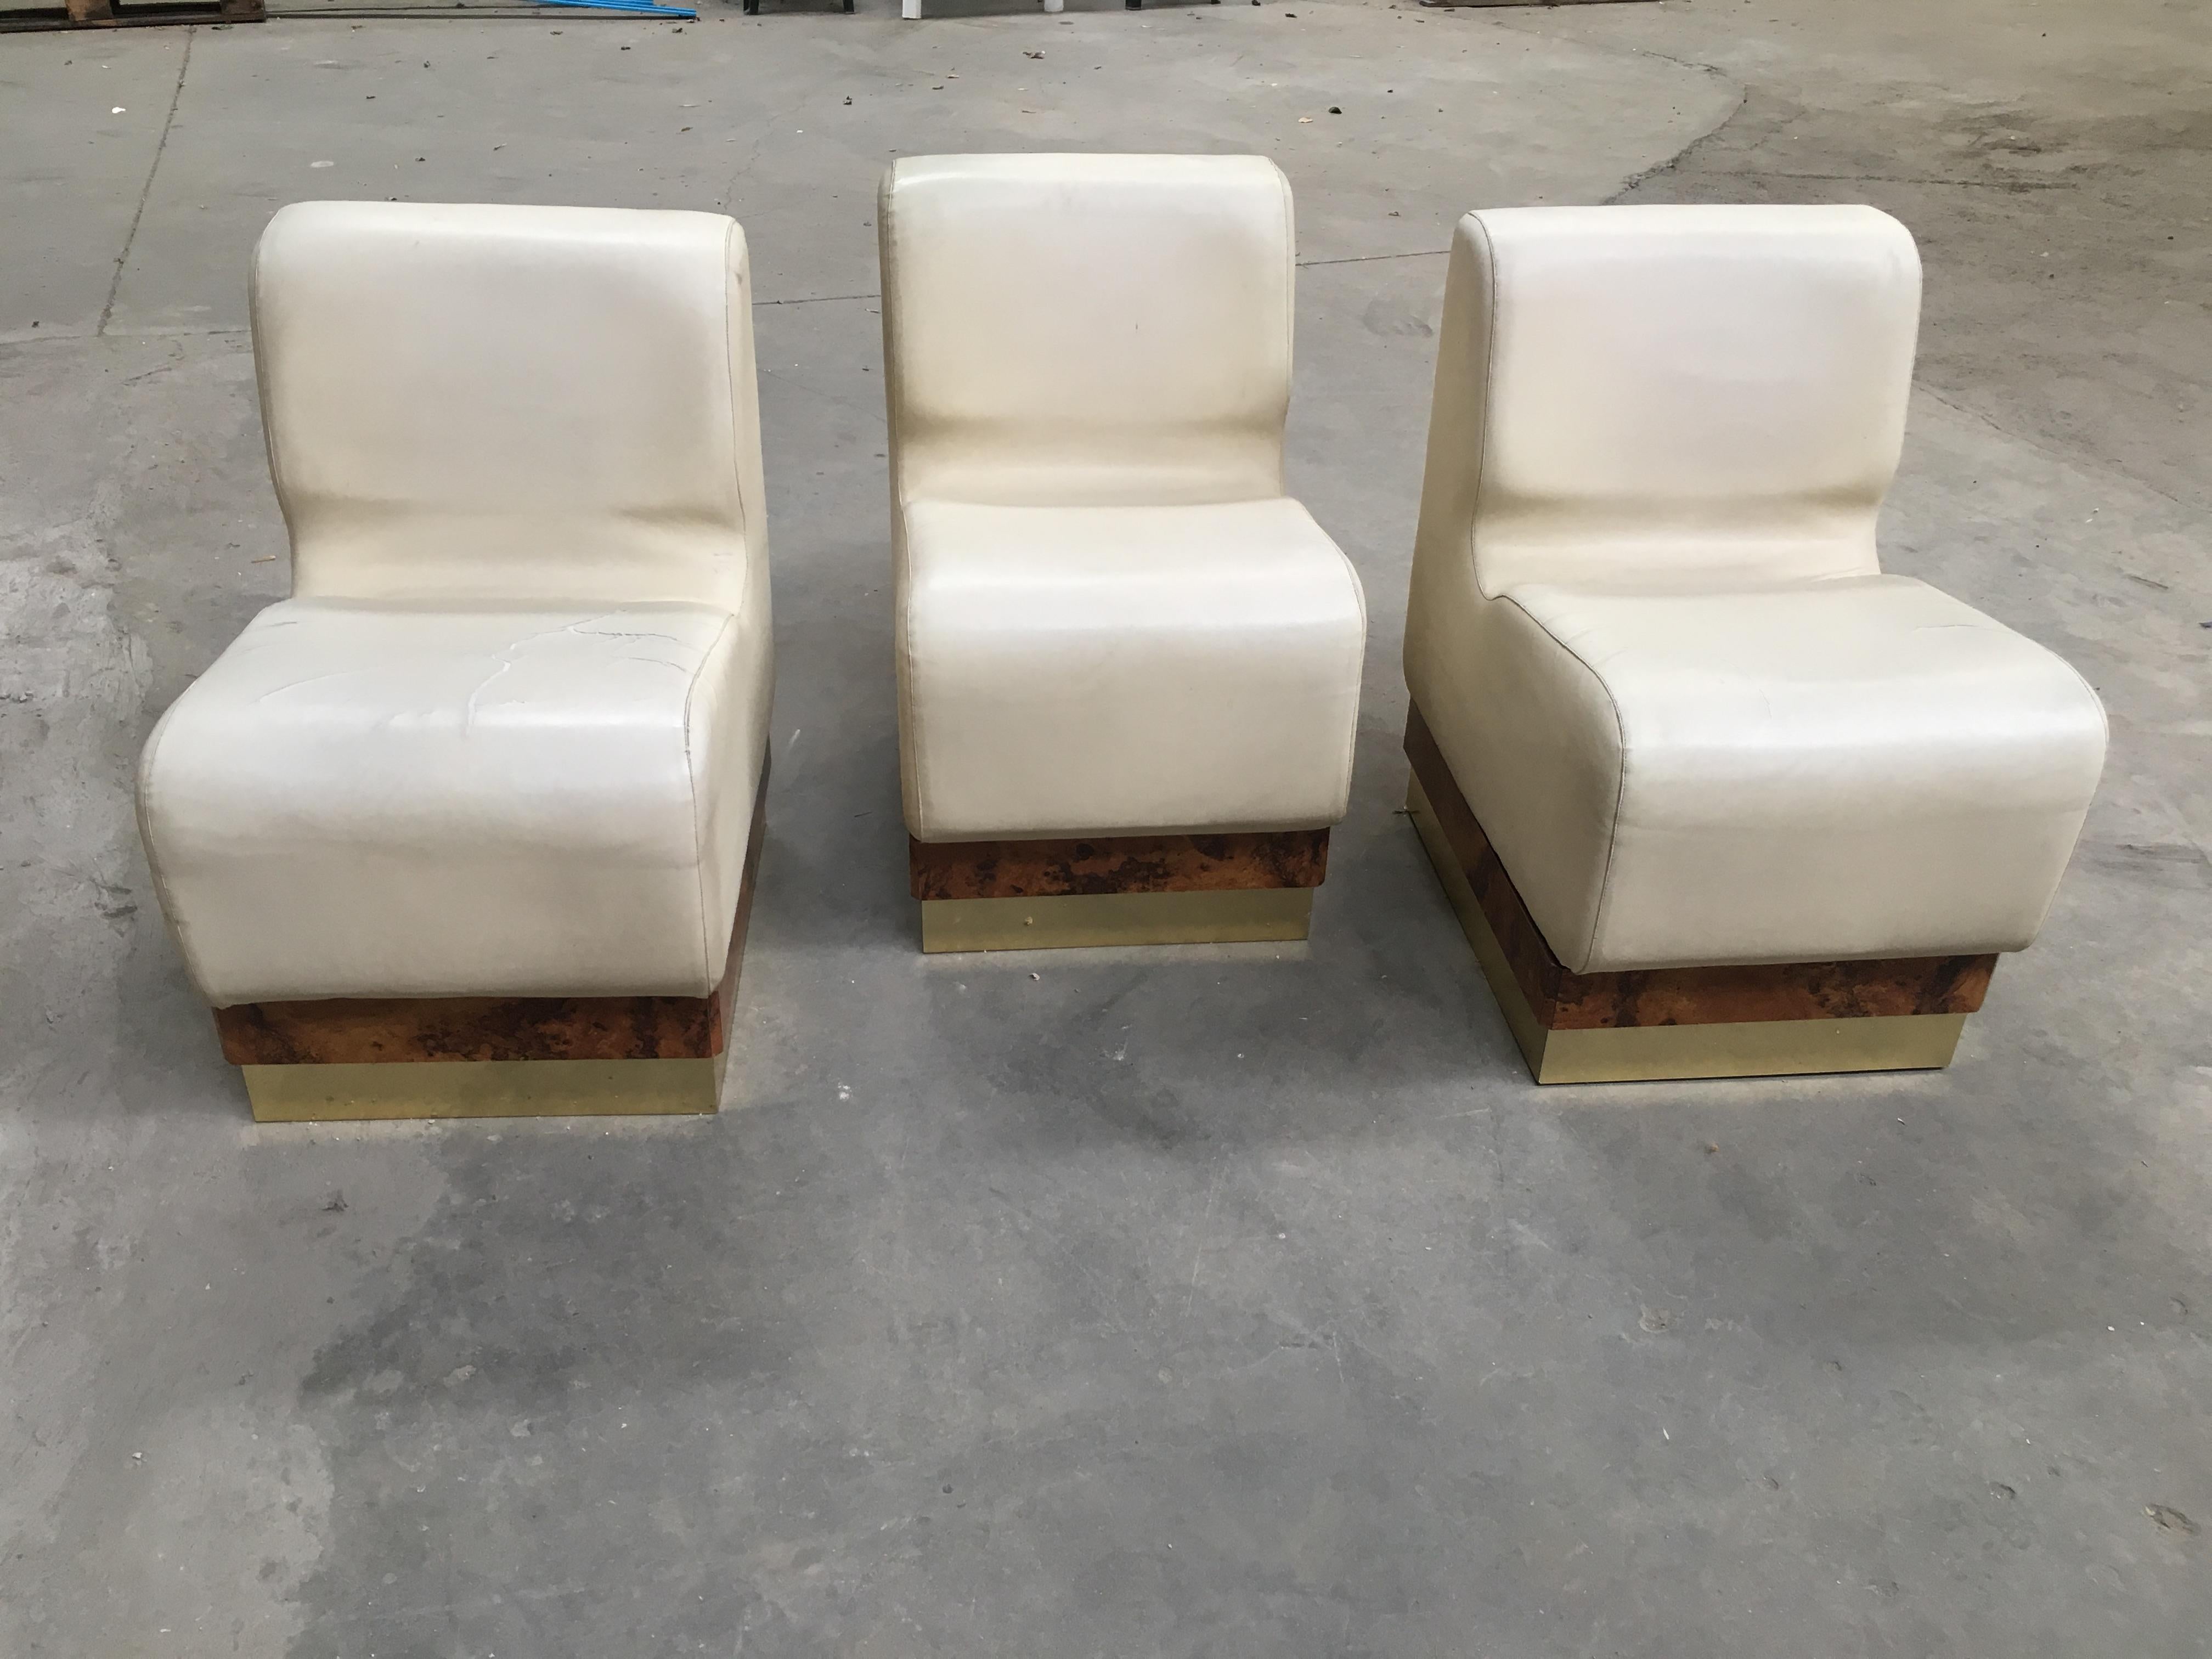 Late 20th Century Mid-Century Modern Italian Living Room Set Consisting in 3 Sectional Armchairs For Sale